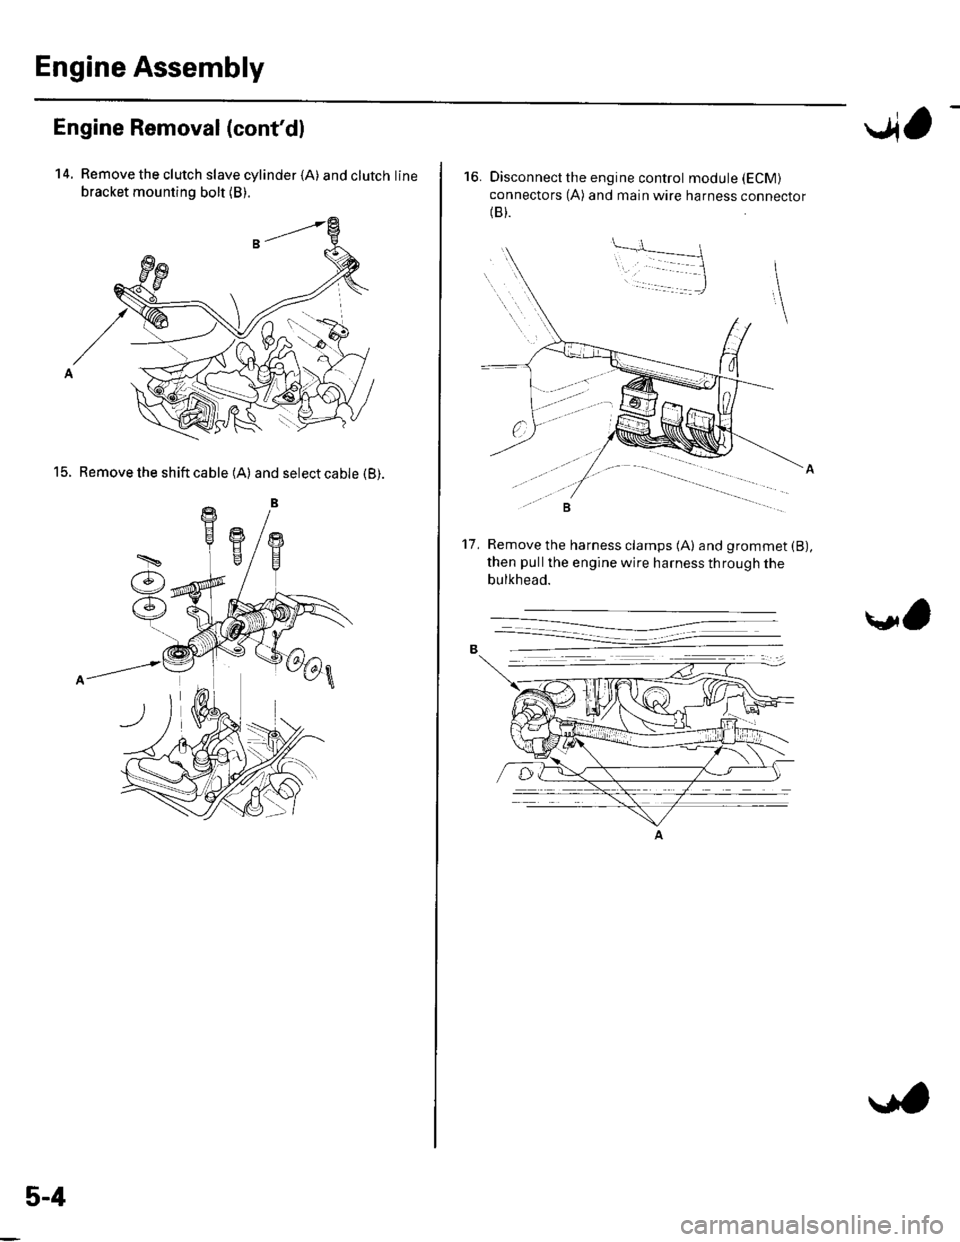 HONDA CIVIC 2003 7.G Workshop Manual Engine Assembly
Engine Removal (contdl
14. Remove the clutch slave cylinder {A) andclutchline
bracket mounting bolt (B).
15. Remove the shift cable (A) and select cable (B).
5-4
..4,
16. Disconnect t